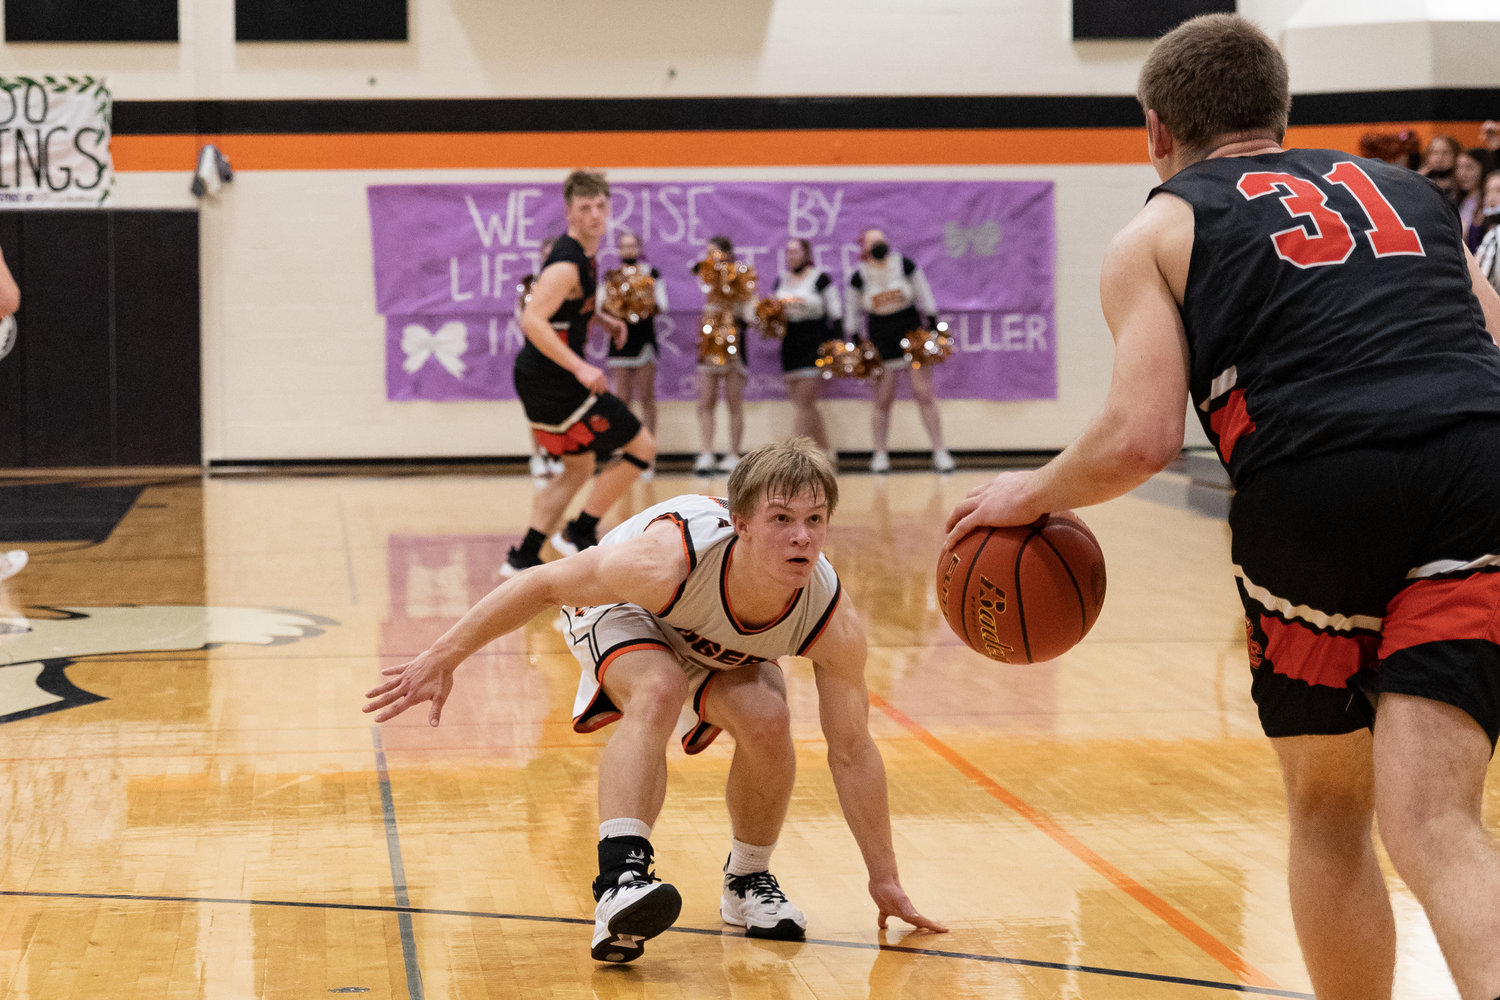 Cael Stanley gets low in his stance guarding Kalama's Jackson Esary Jan. 14.